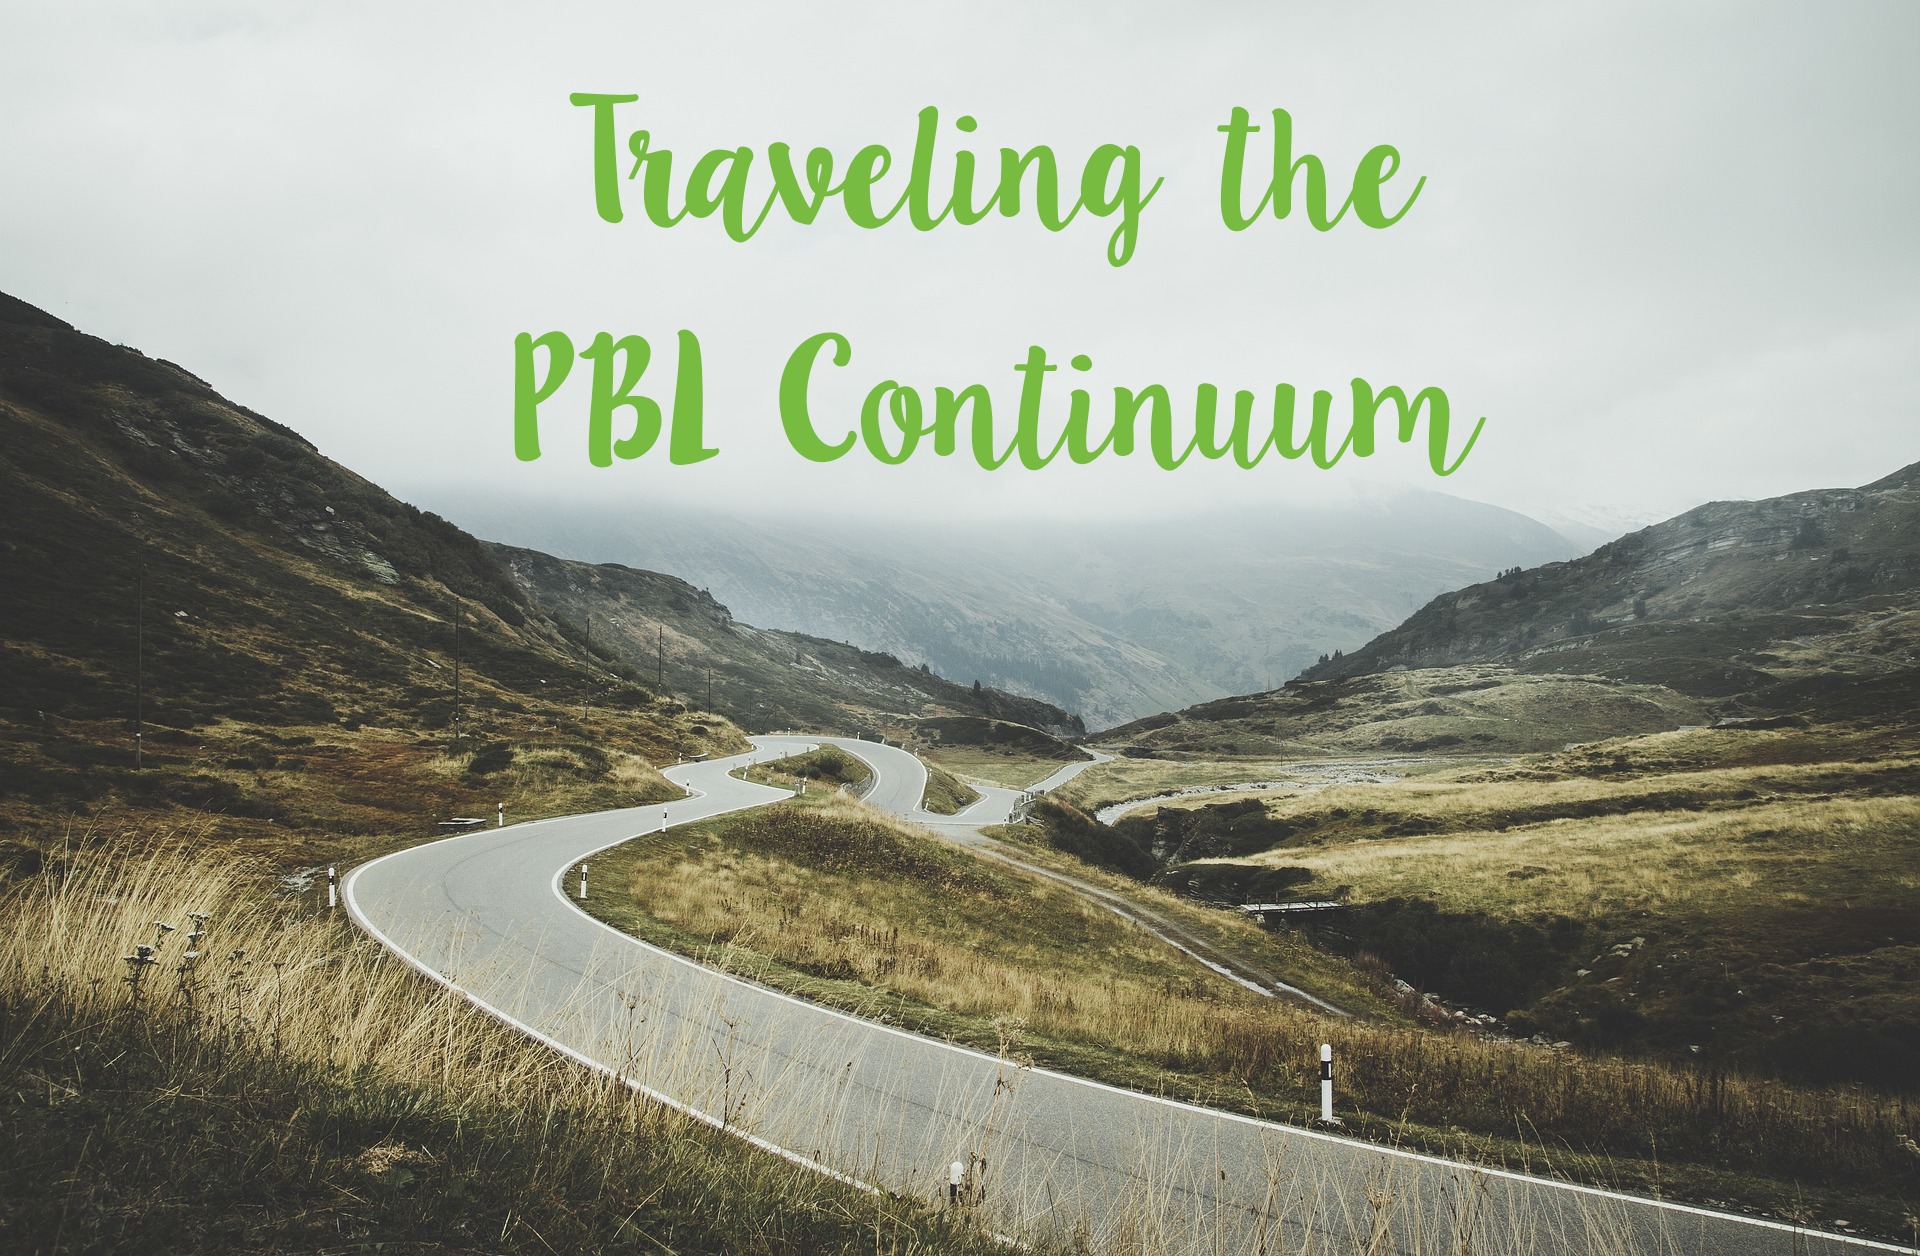 Where Are You on the Continuum of PBL Implementation?